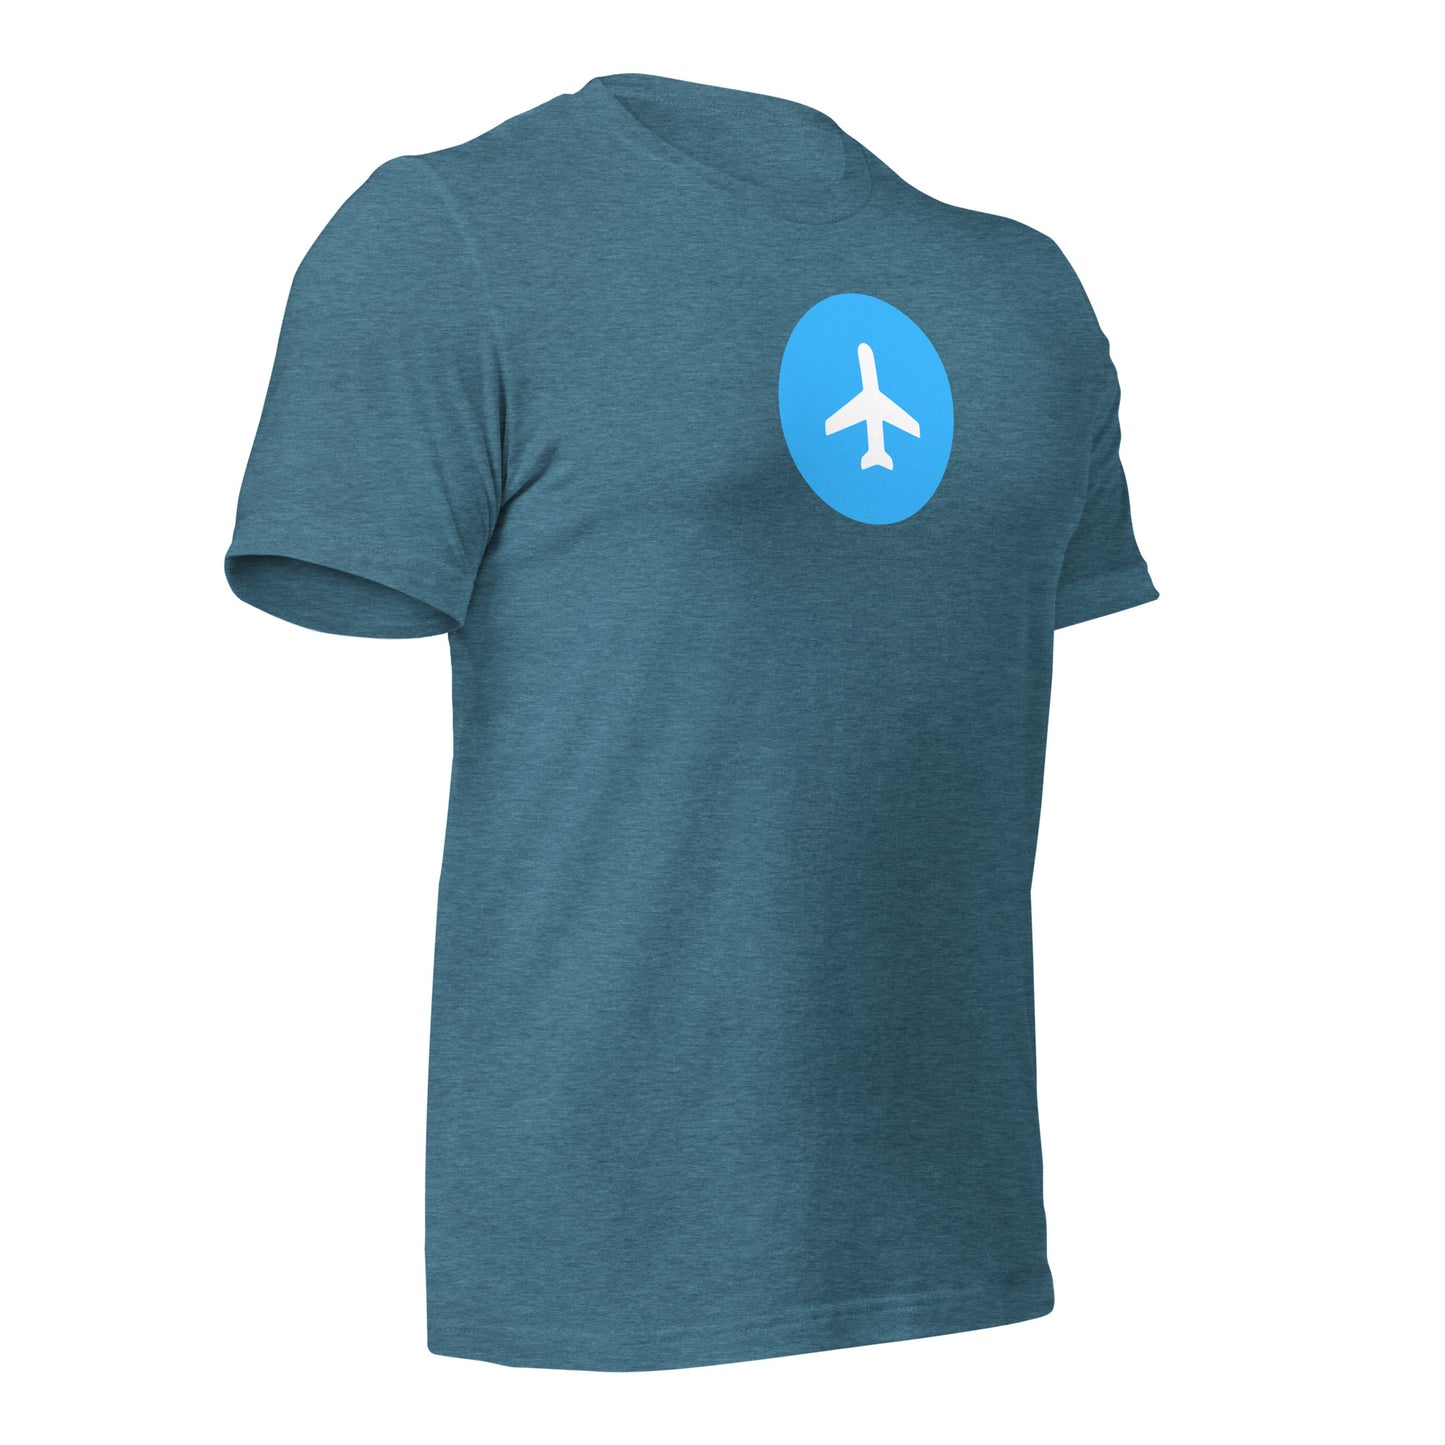 Airplane Mode Activated Samsung T-Shirt for Entrepreneurs